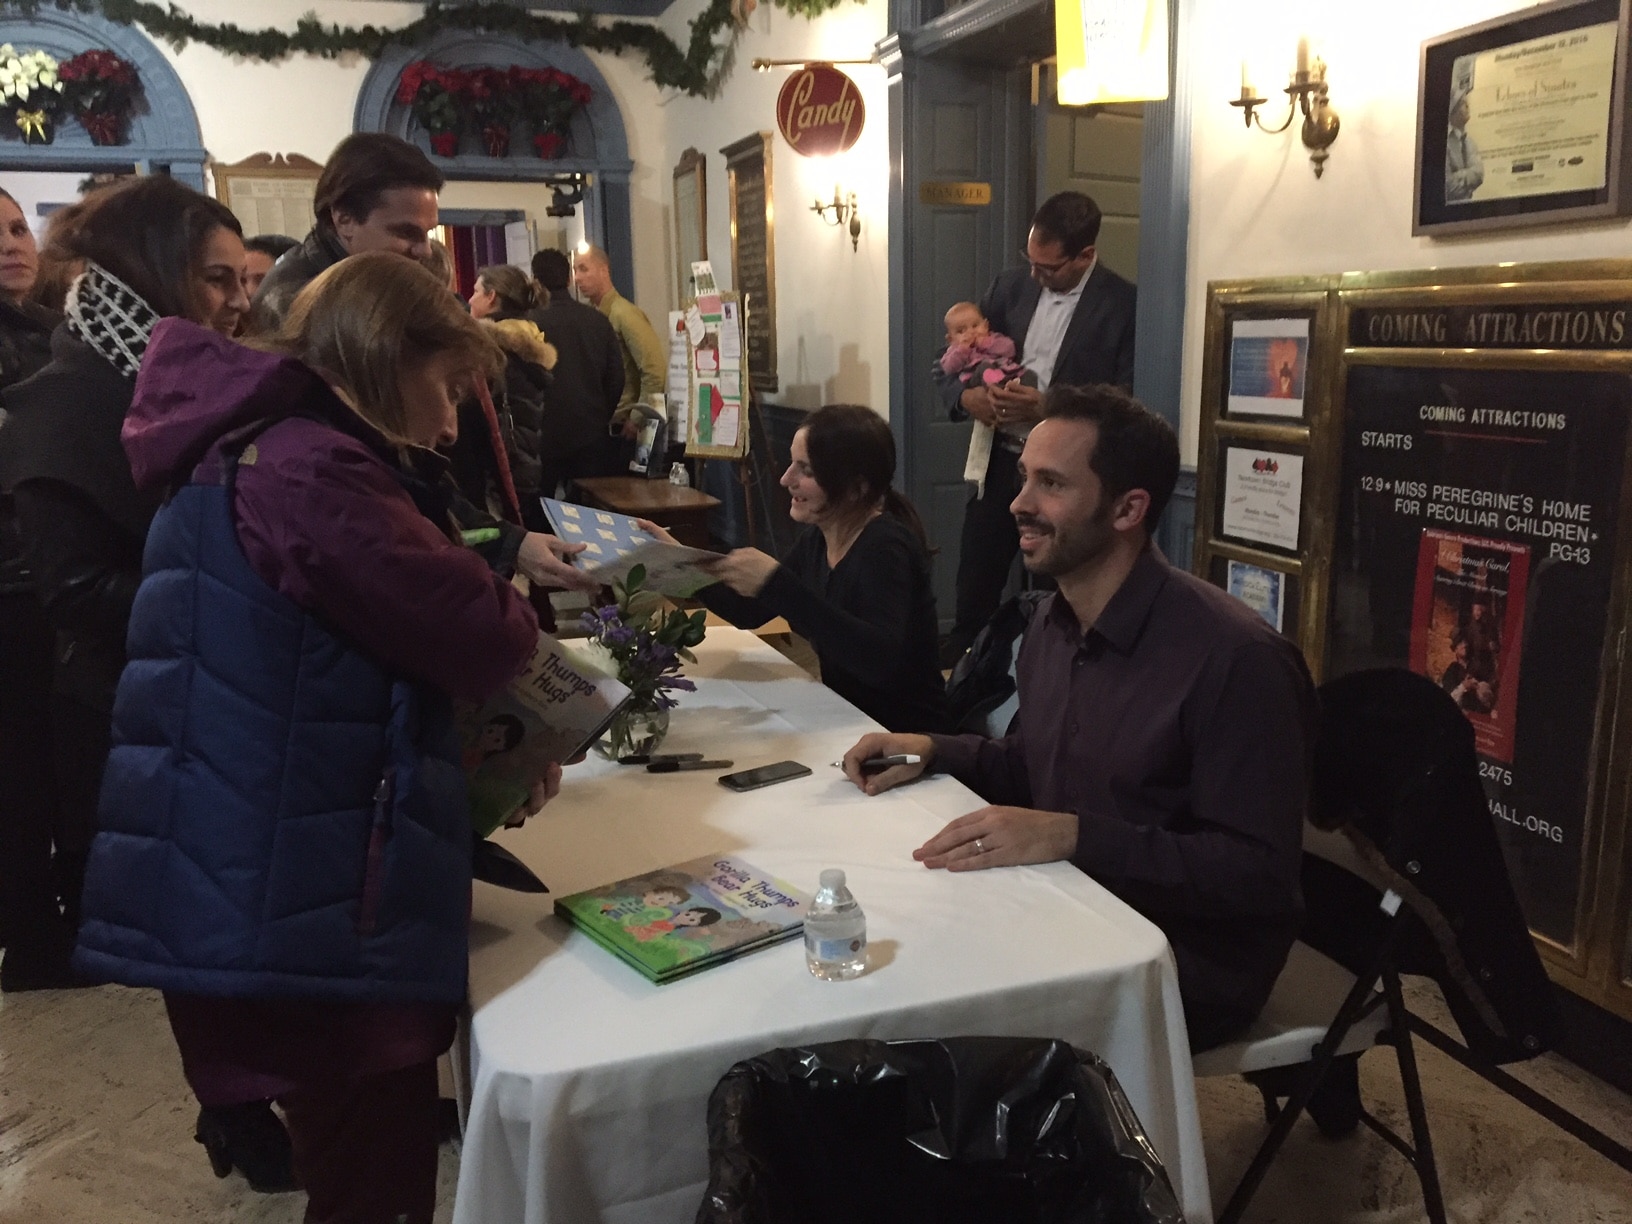 My brother Alex, and dear friend Erin Mariano (the illustrator), signing “Gorilla Thumps and Bear Hugs” our new Tapping Solution kids book. Everyone who attended received a free copy of the book and we’re already seeing it being used with kids.